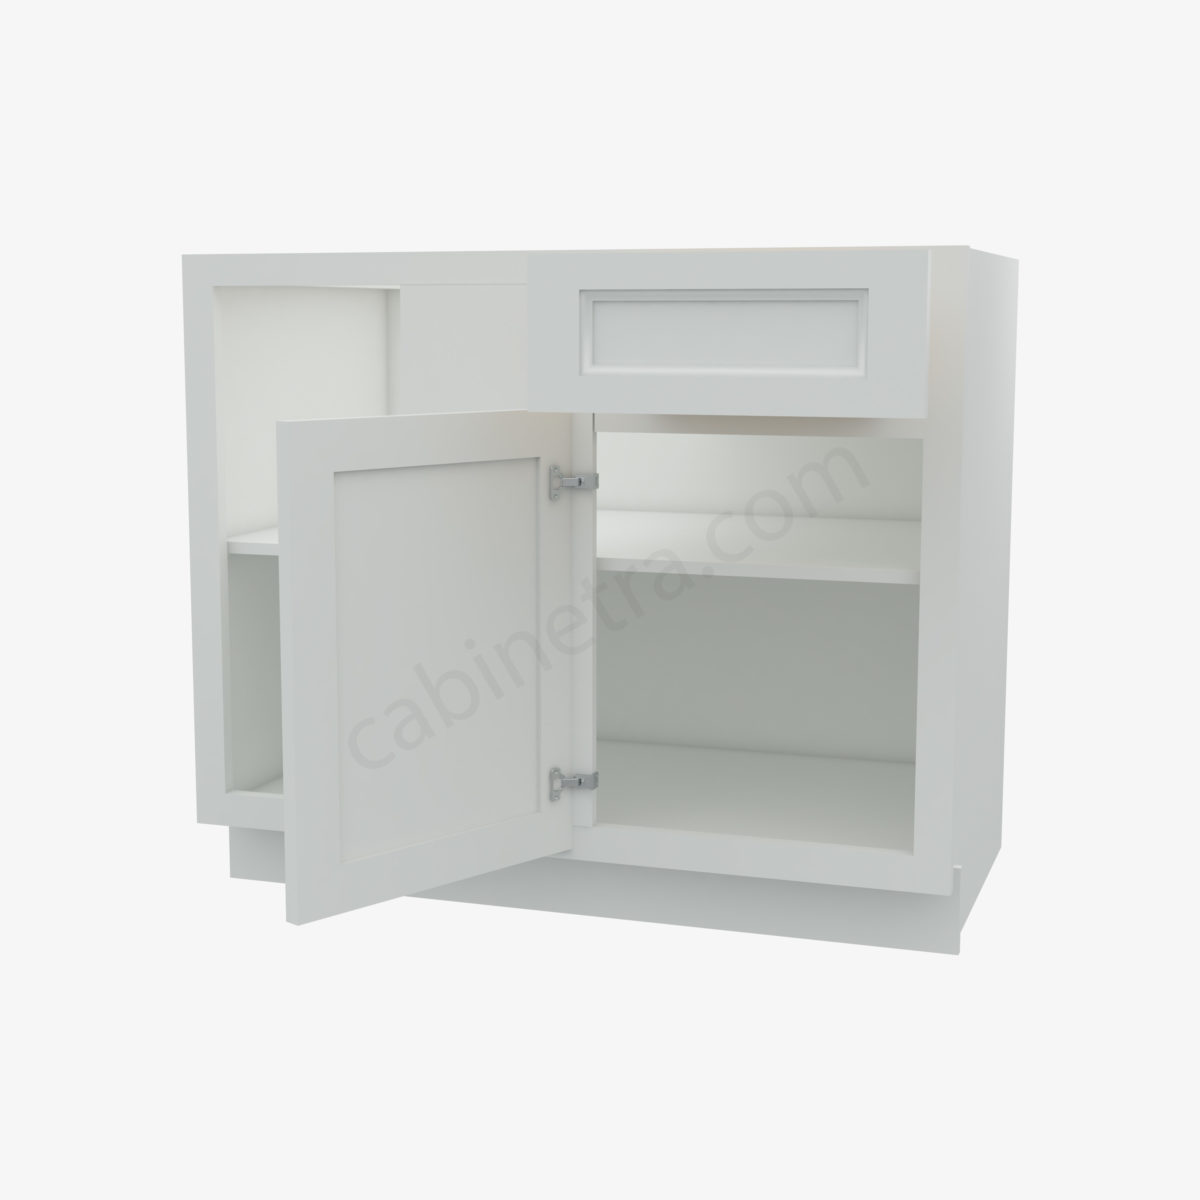 TW BBLC42 45 39W 5 Forevermark Uptown White Cabinetra scaled